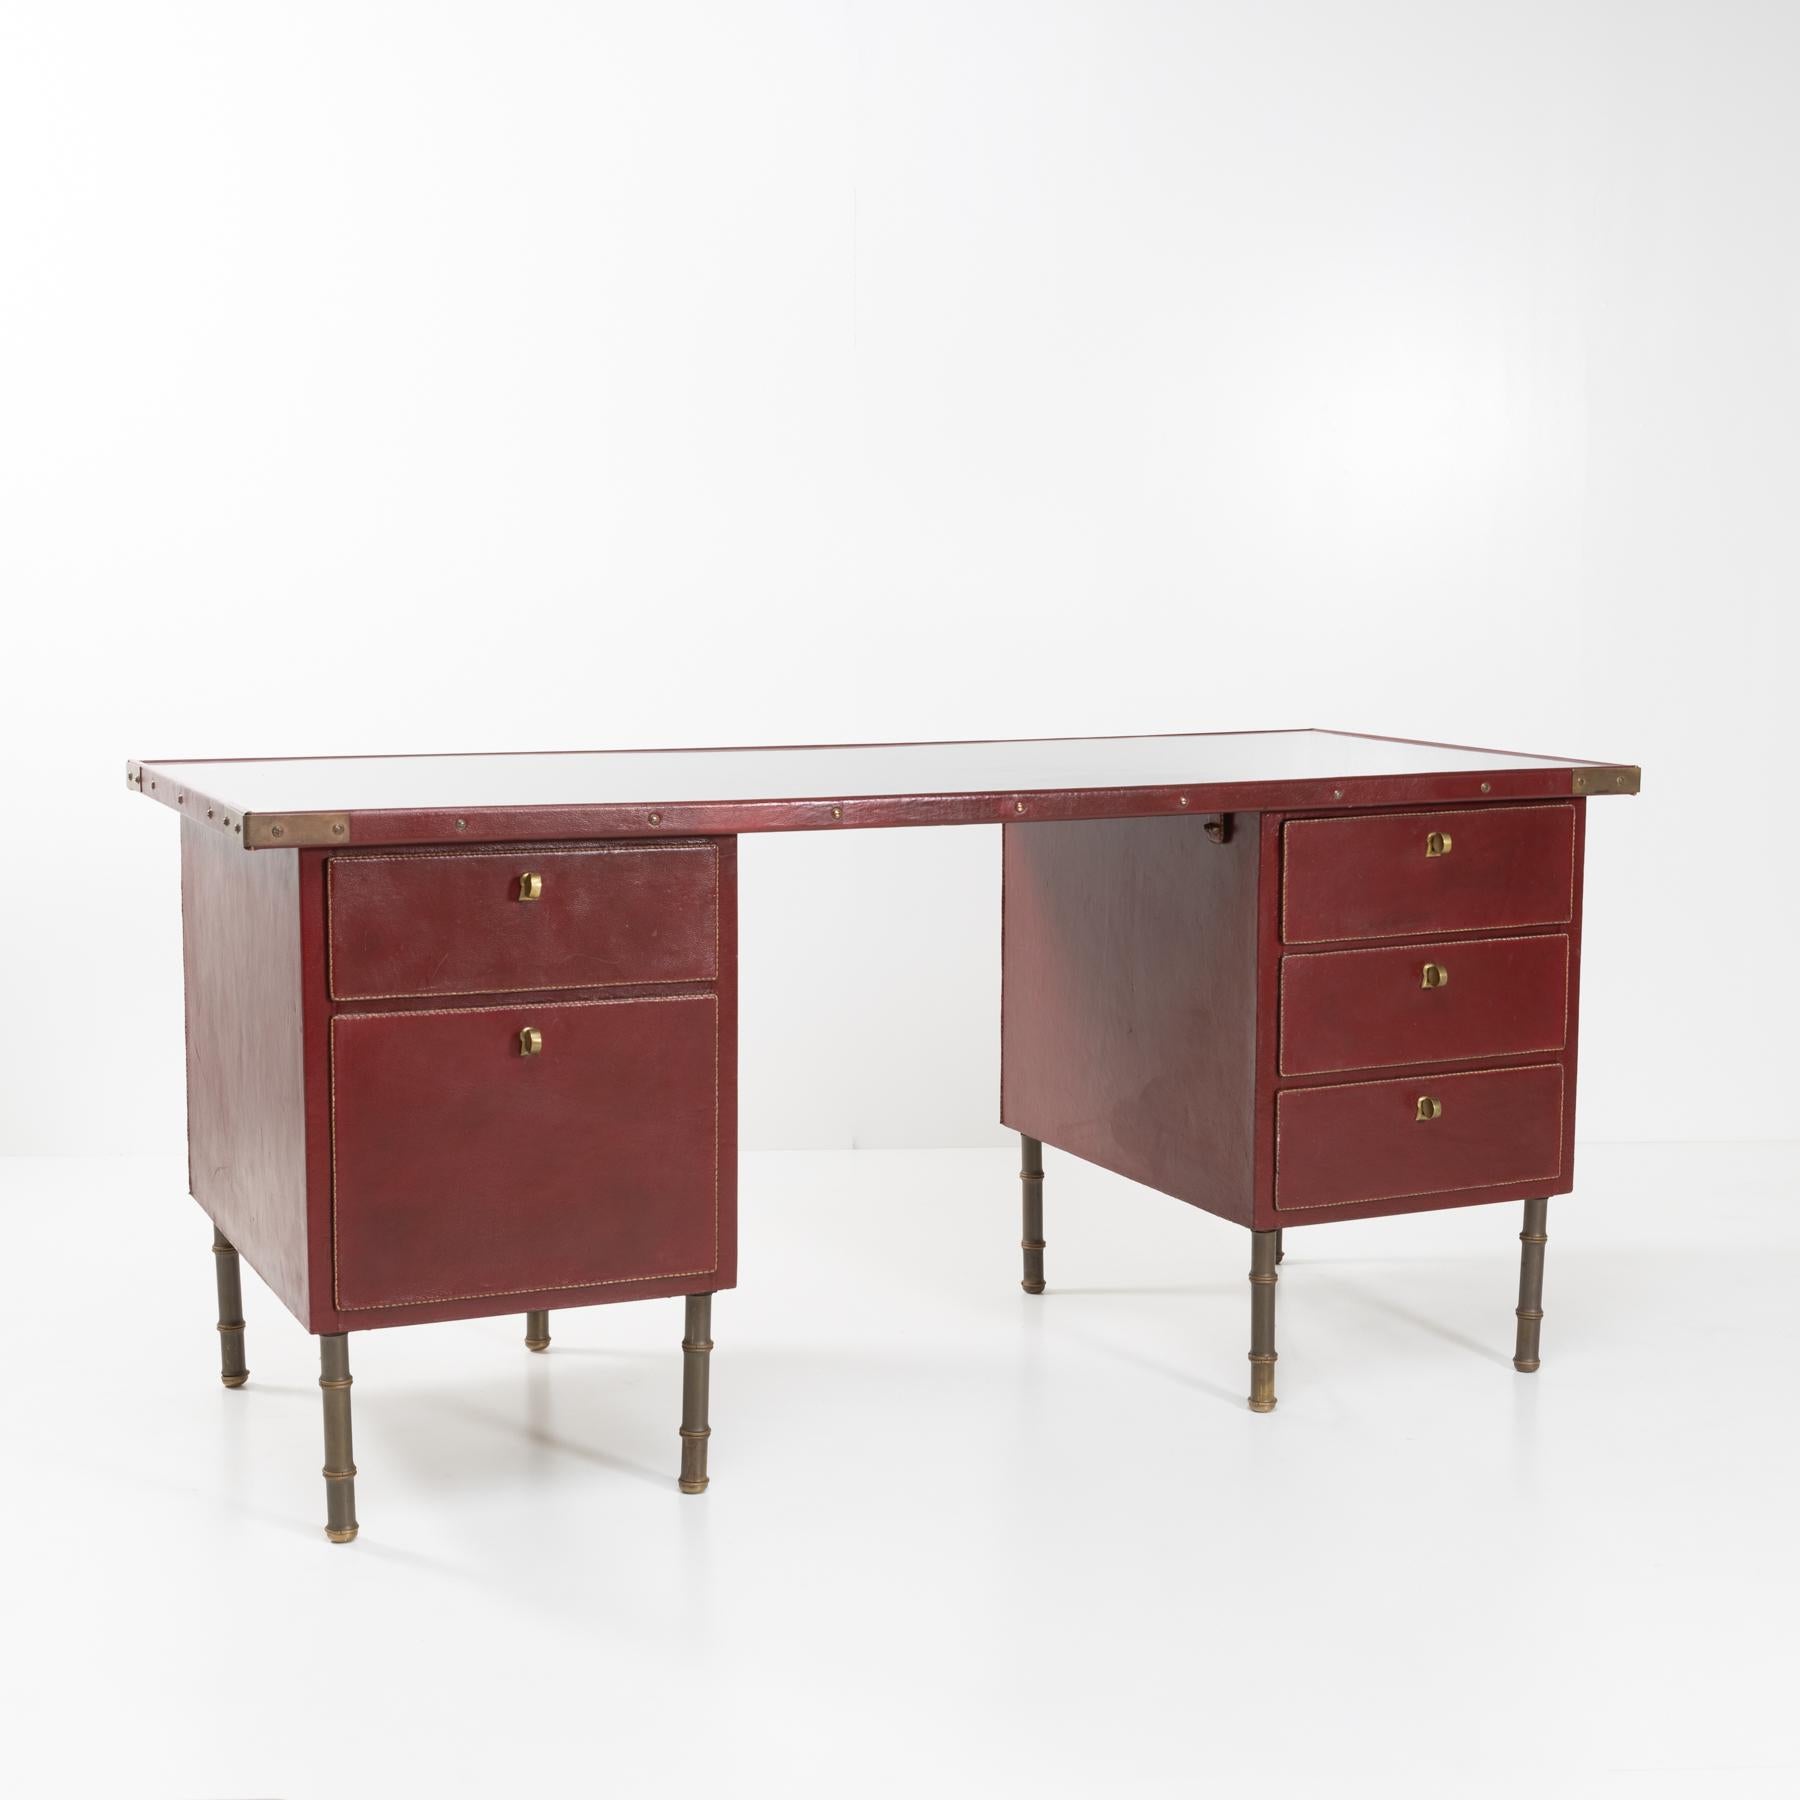 Two coffers desk office in steel and wood fully upholstered in red leather with saddle stitching. 
The right part is equipped of XX drawers, the left is equipped of XX drawers. The drawers have their original keys which allow them to be closed.